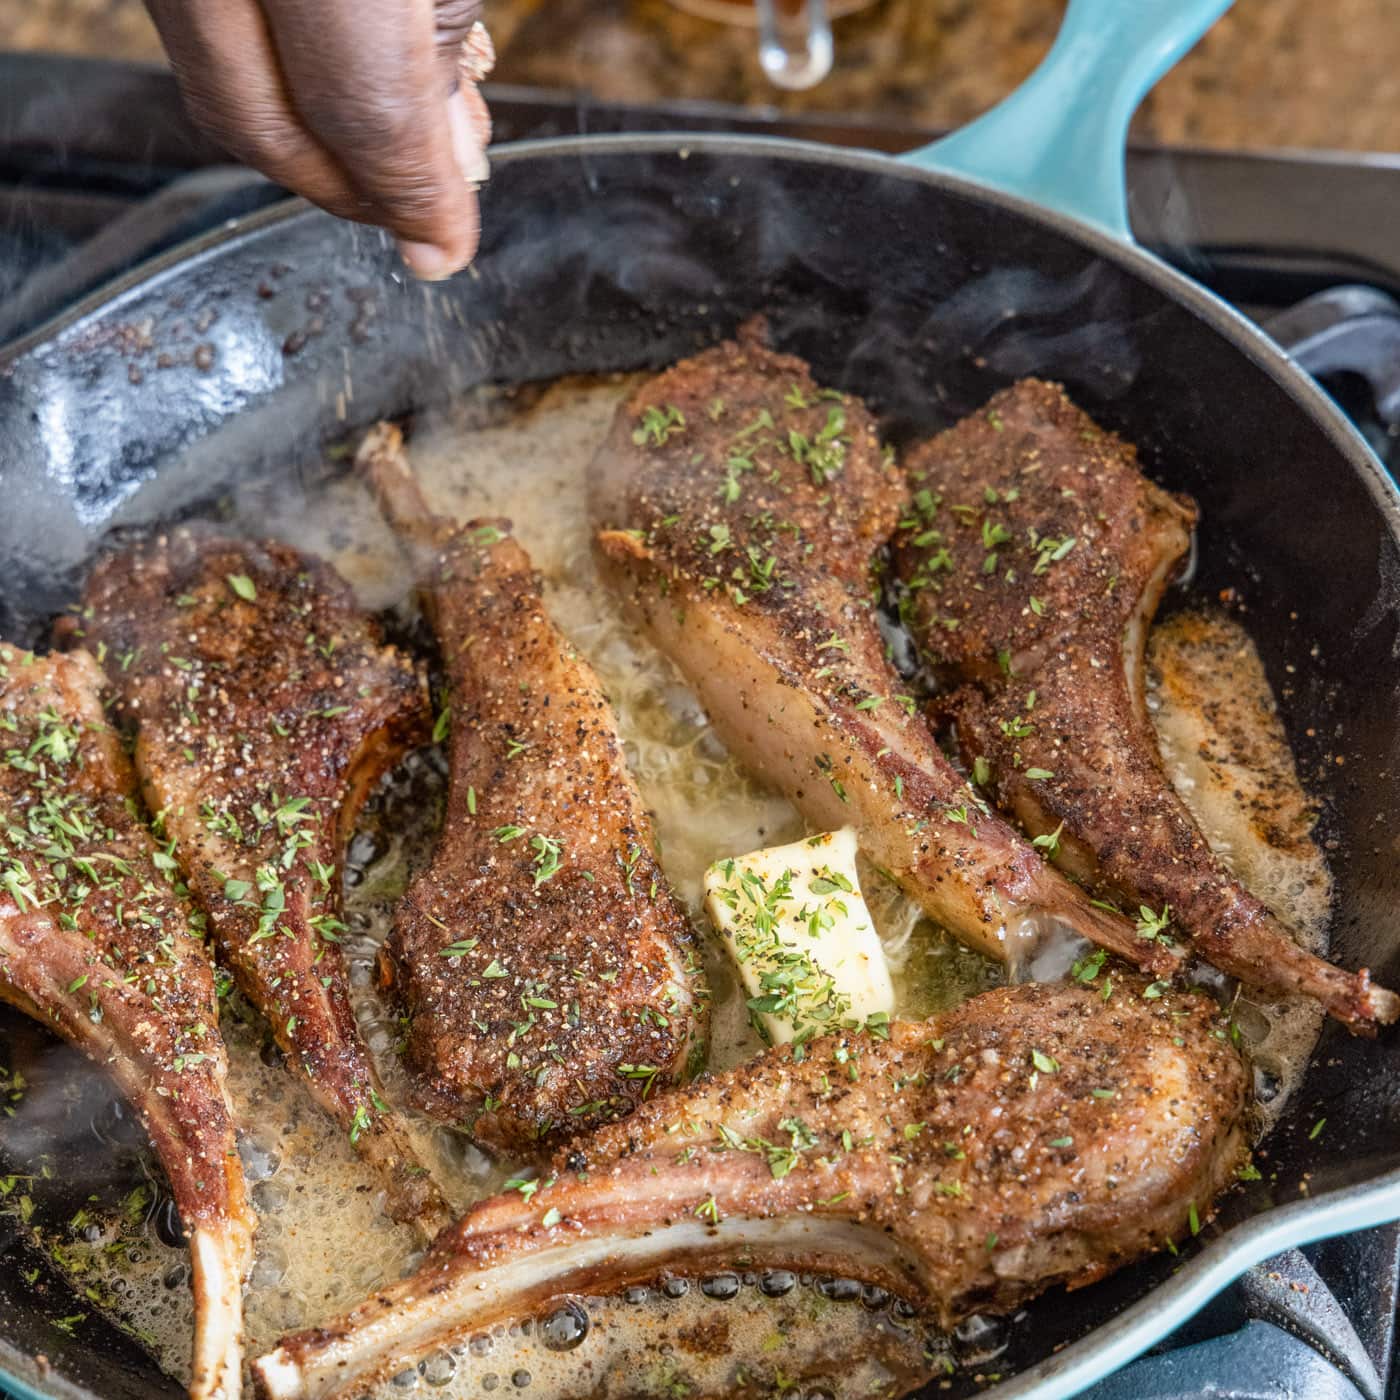 butter and thyme on lamb chops